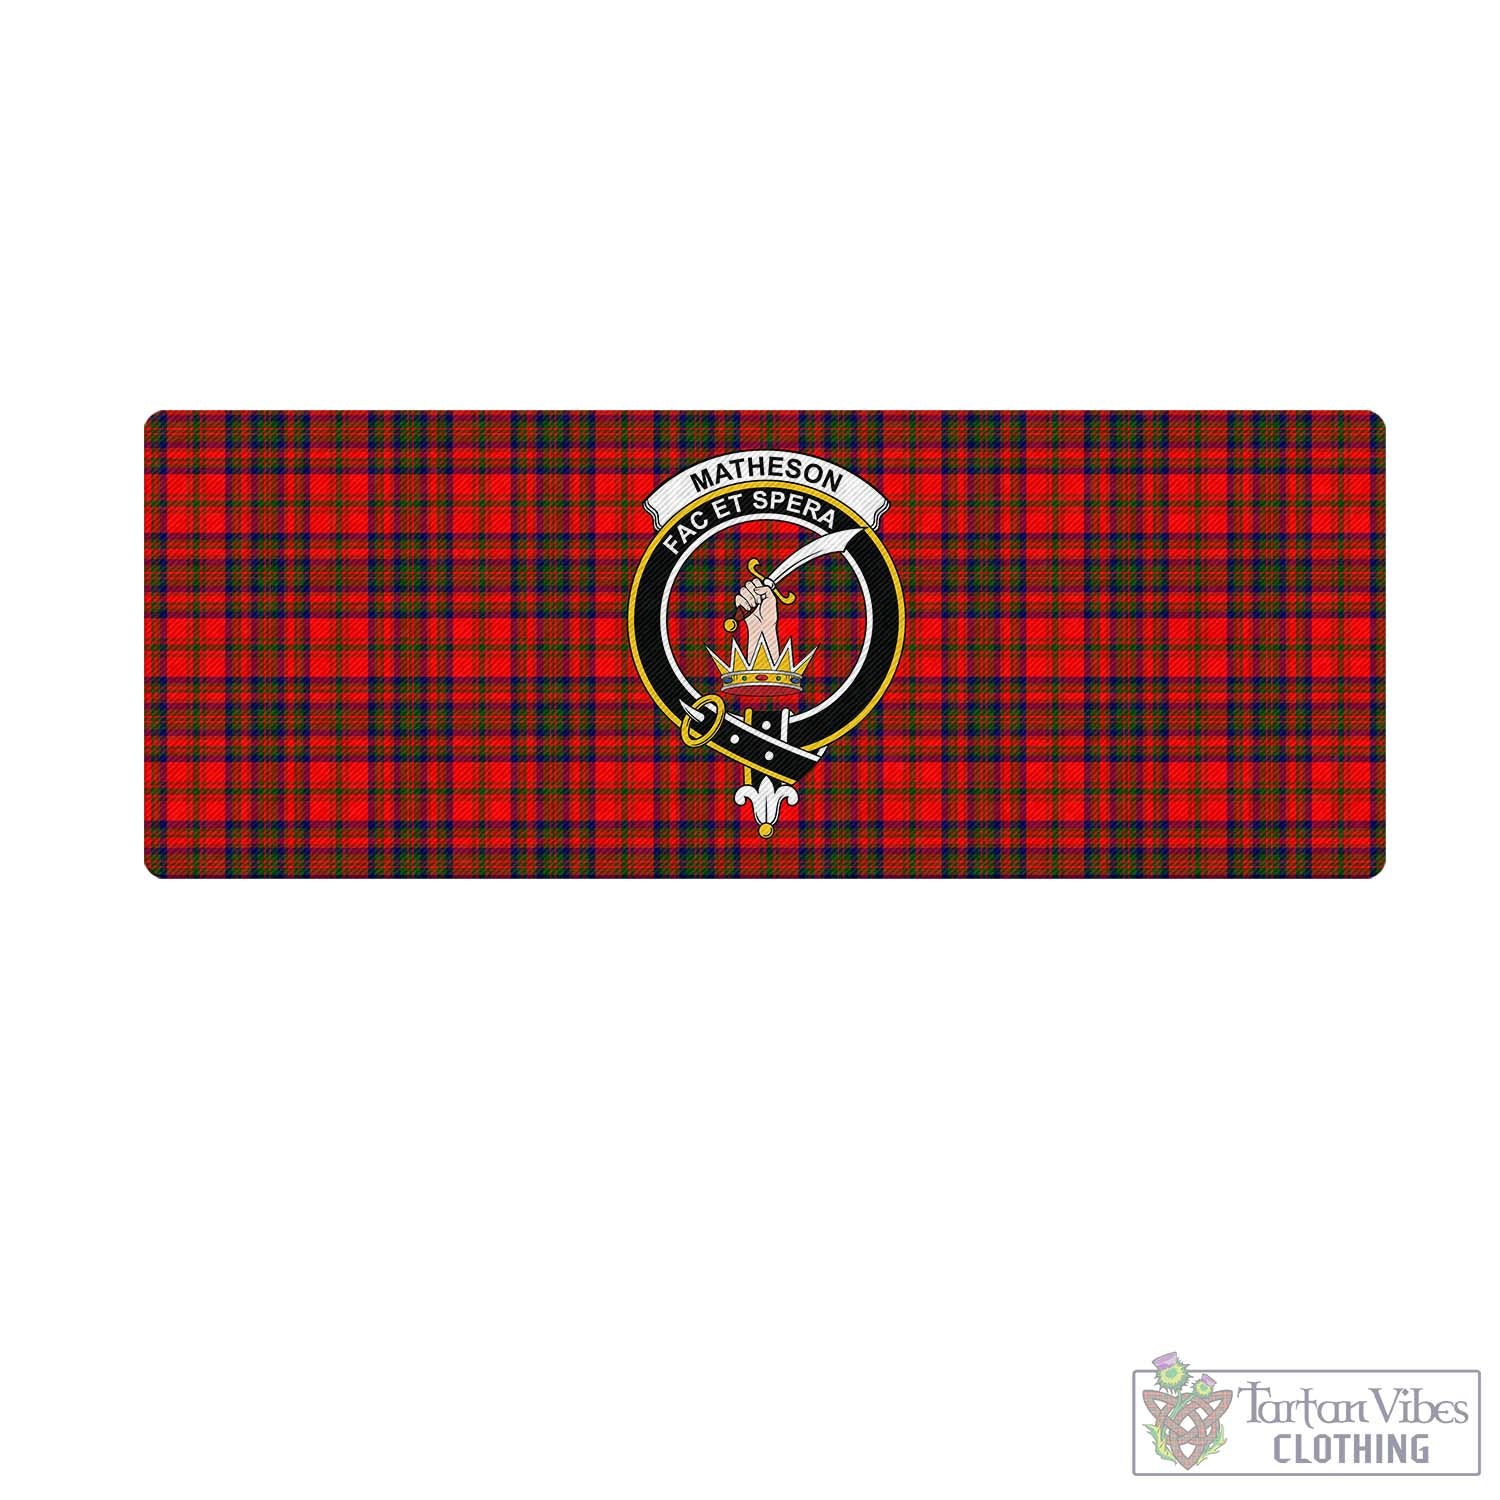 Tartan Vibes Clothing Matheson Modern Tartan Mouse Pad with Family Crest